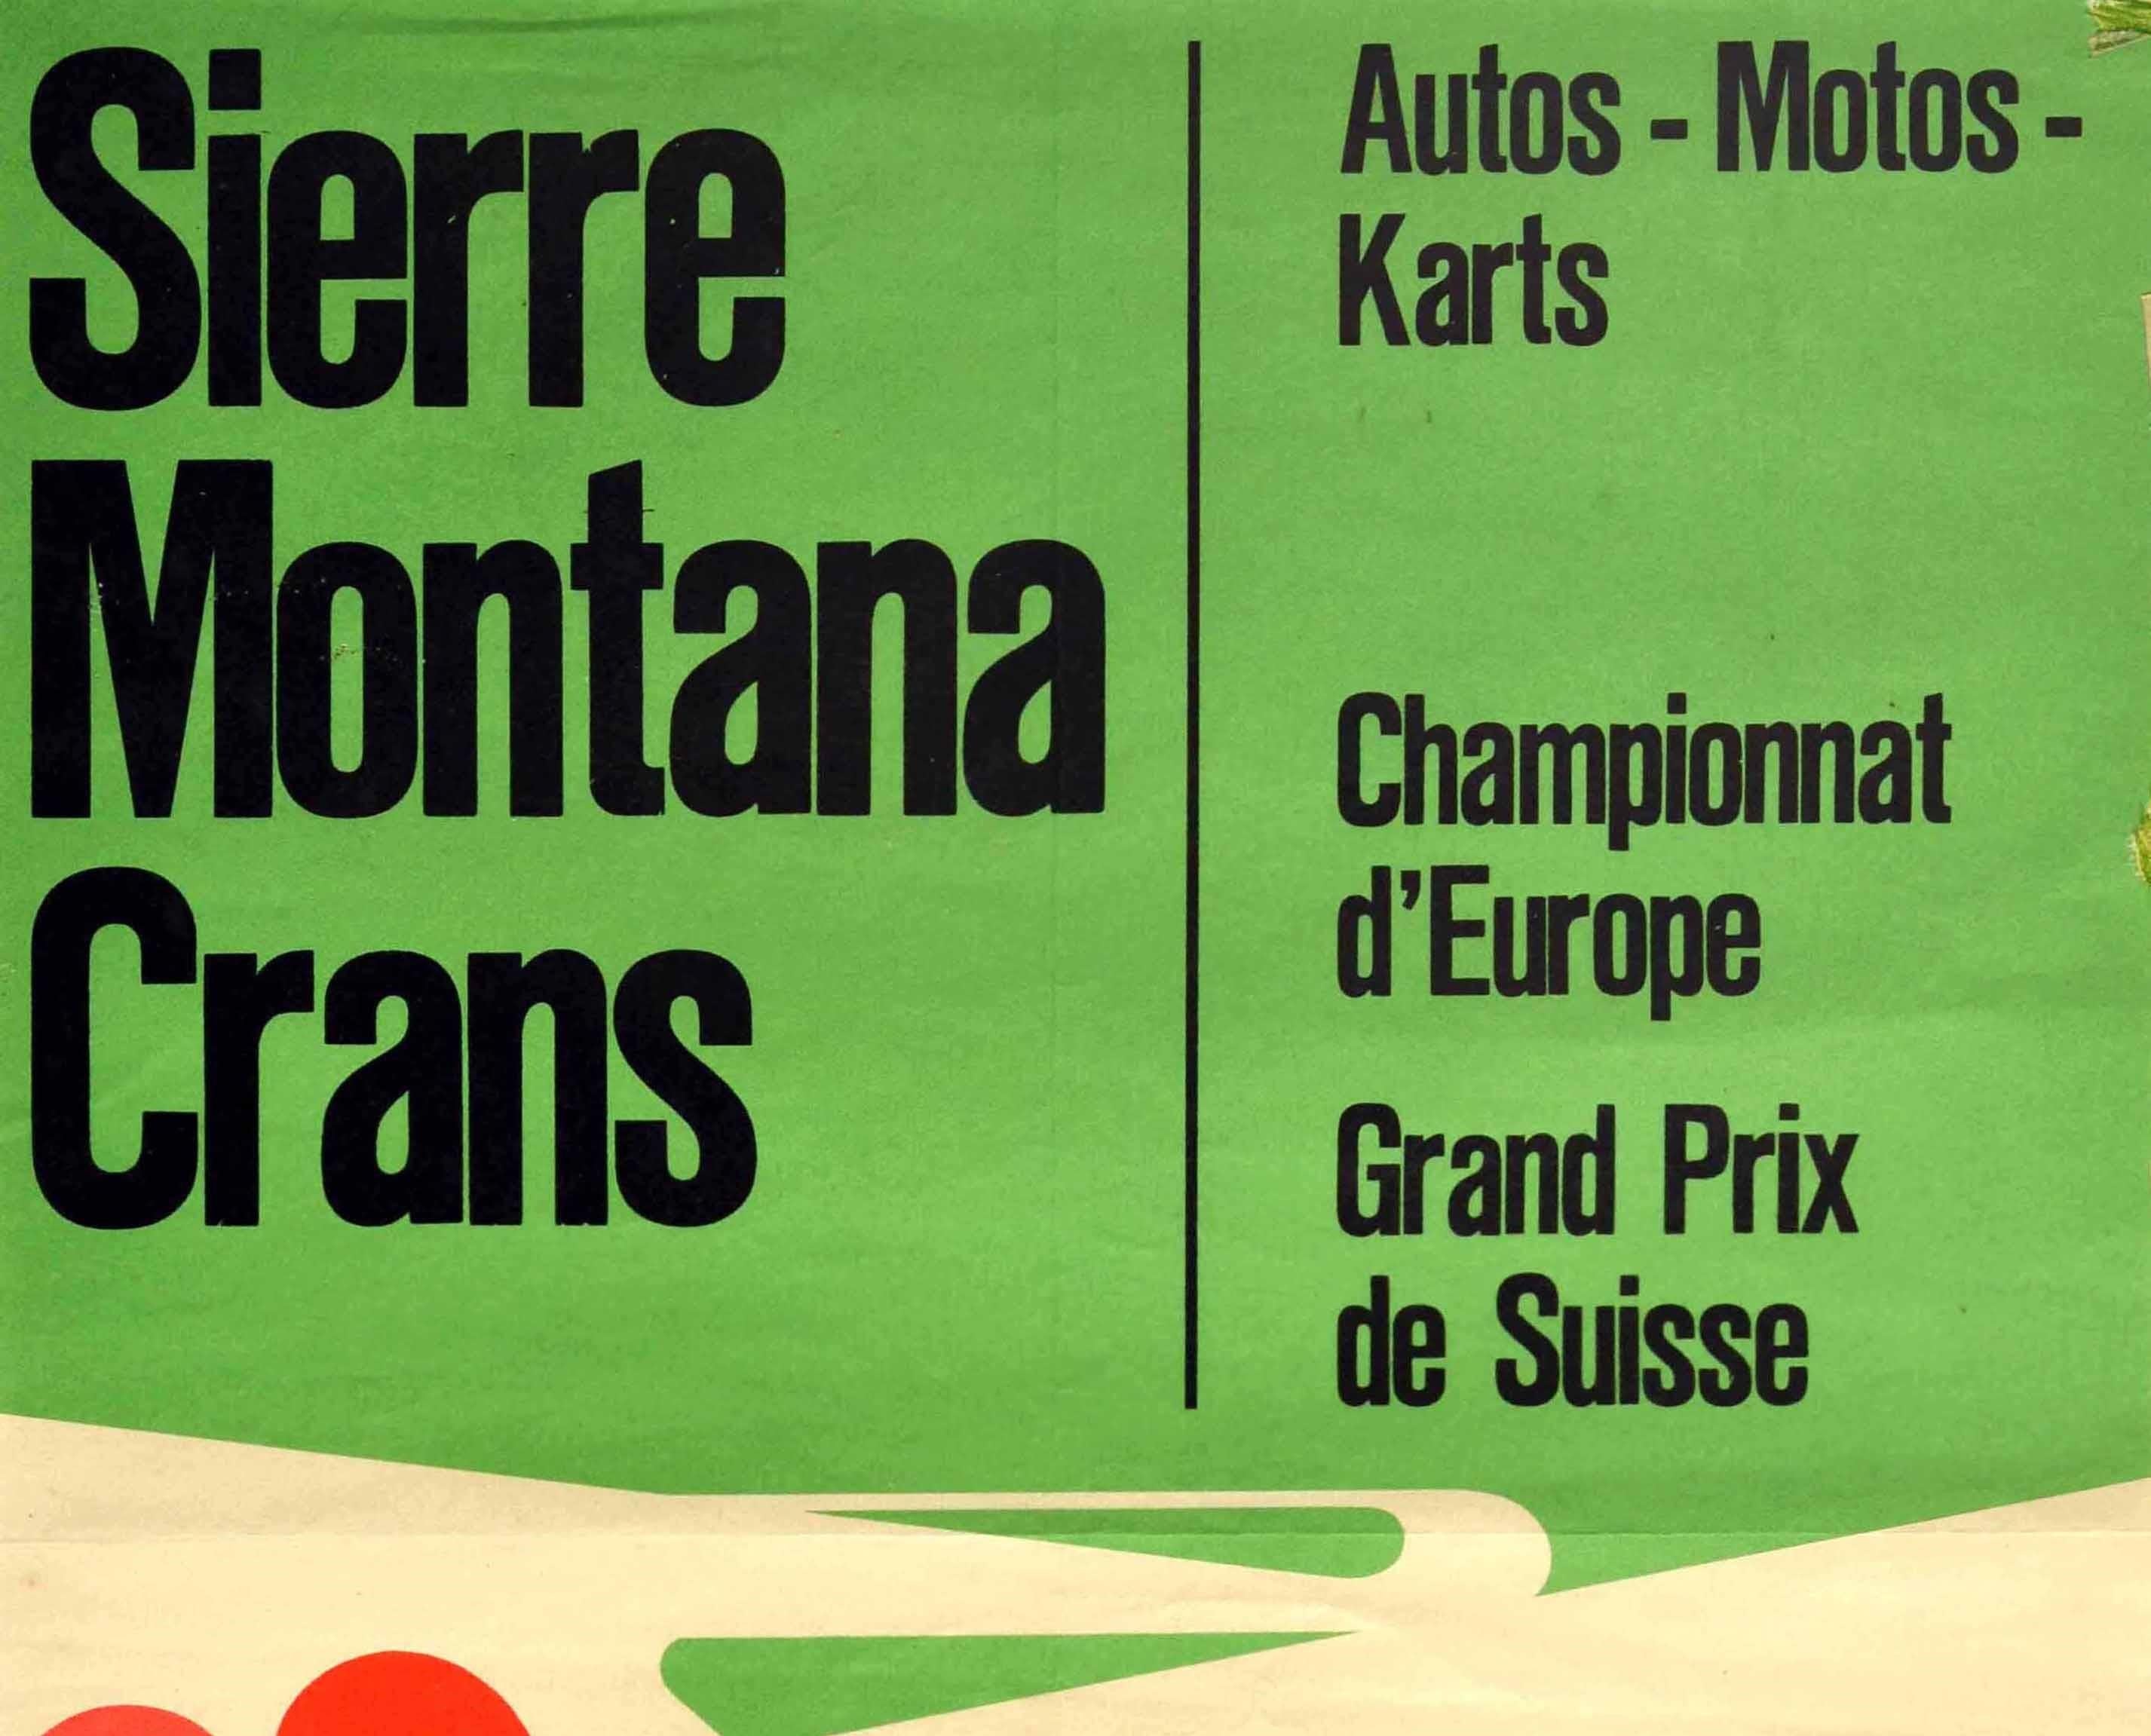 Original vintage motor sport advertising poster issued by the Automobile Club of Switzerland for the Sierre Montana Crans Autos Motos Karts European Championship Swiss Grand Prix on 24-25 August / Championnat d'Europe Grand Prix de Suisse featuring